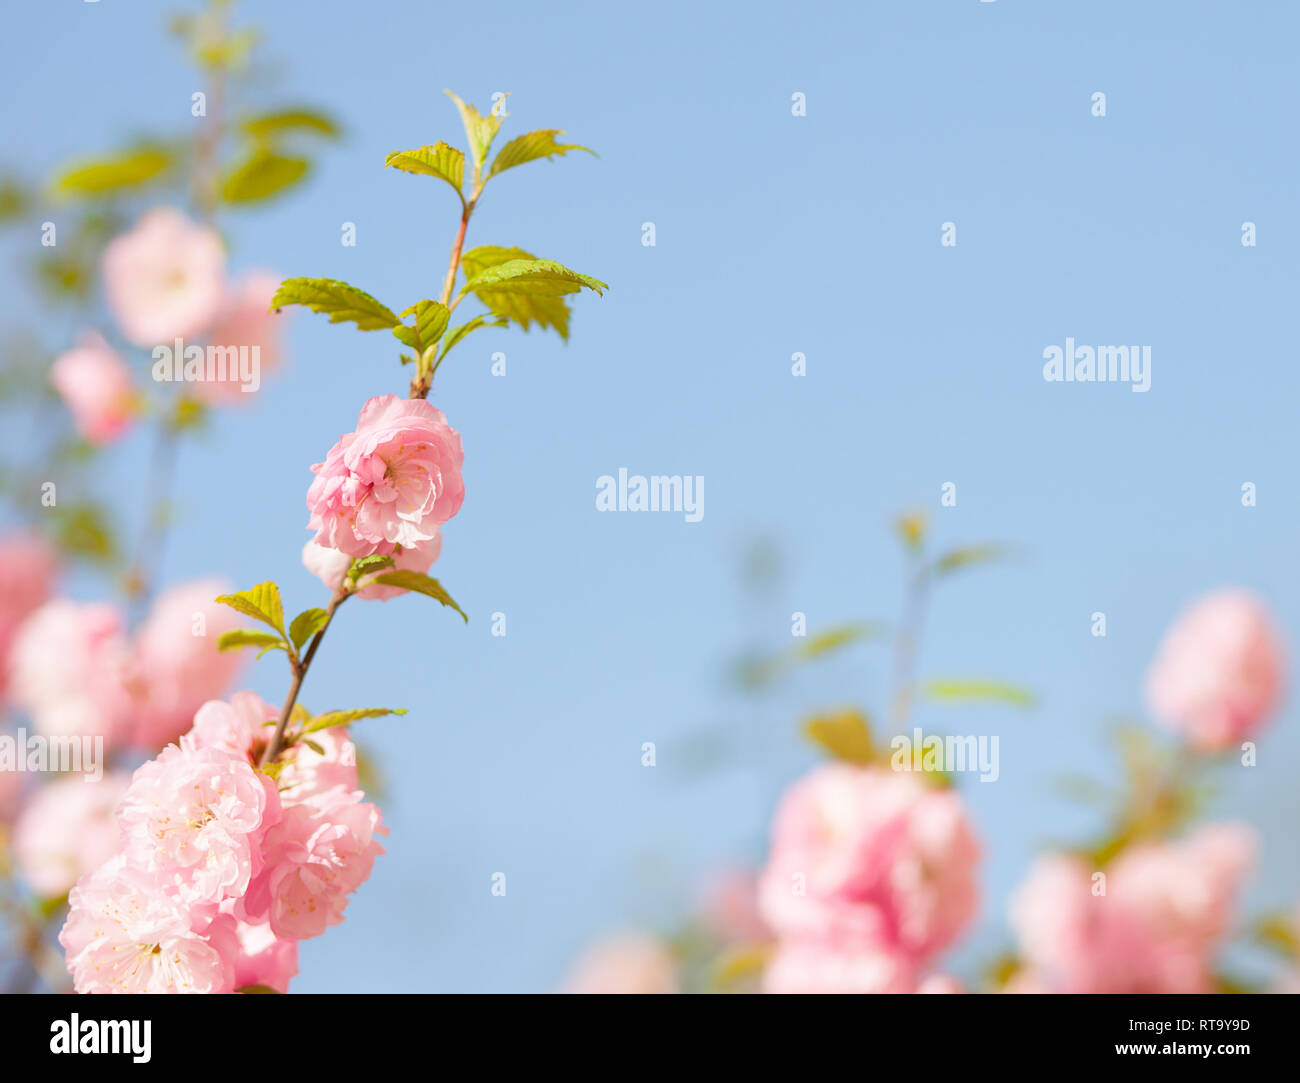 a branch with beautiful pink flowers against the blue sky. Amygdalus triloba. very shallow depth of field. Stock Photo